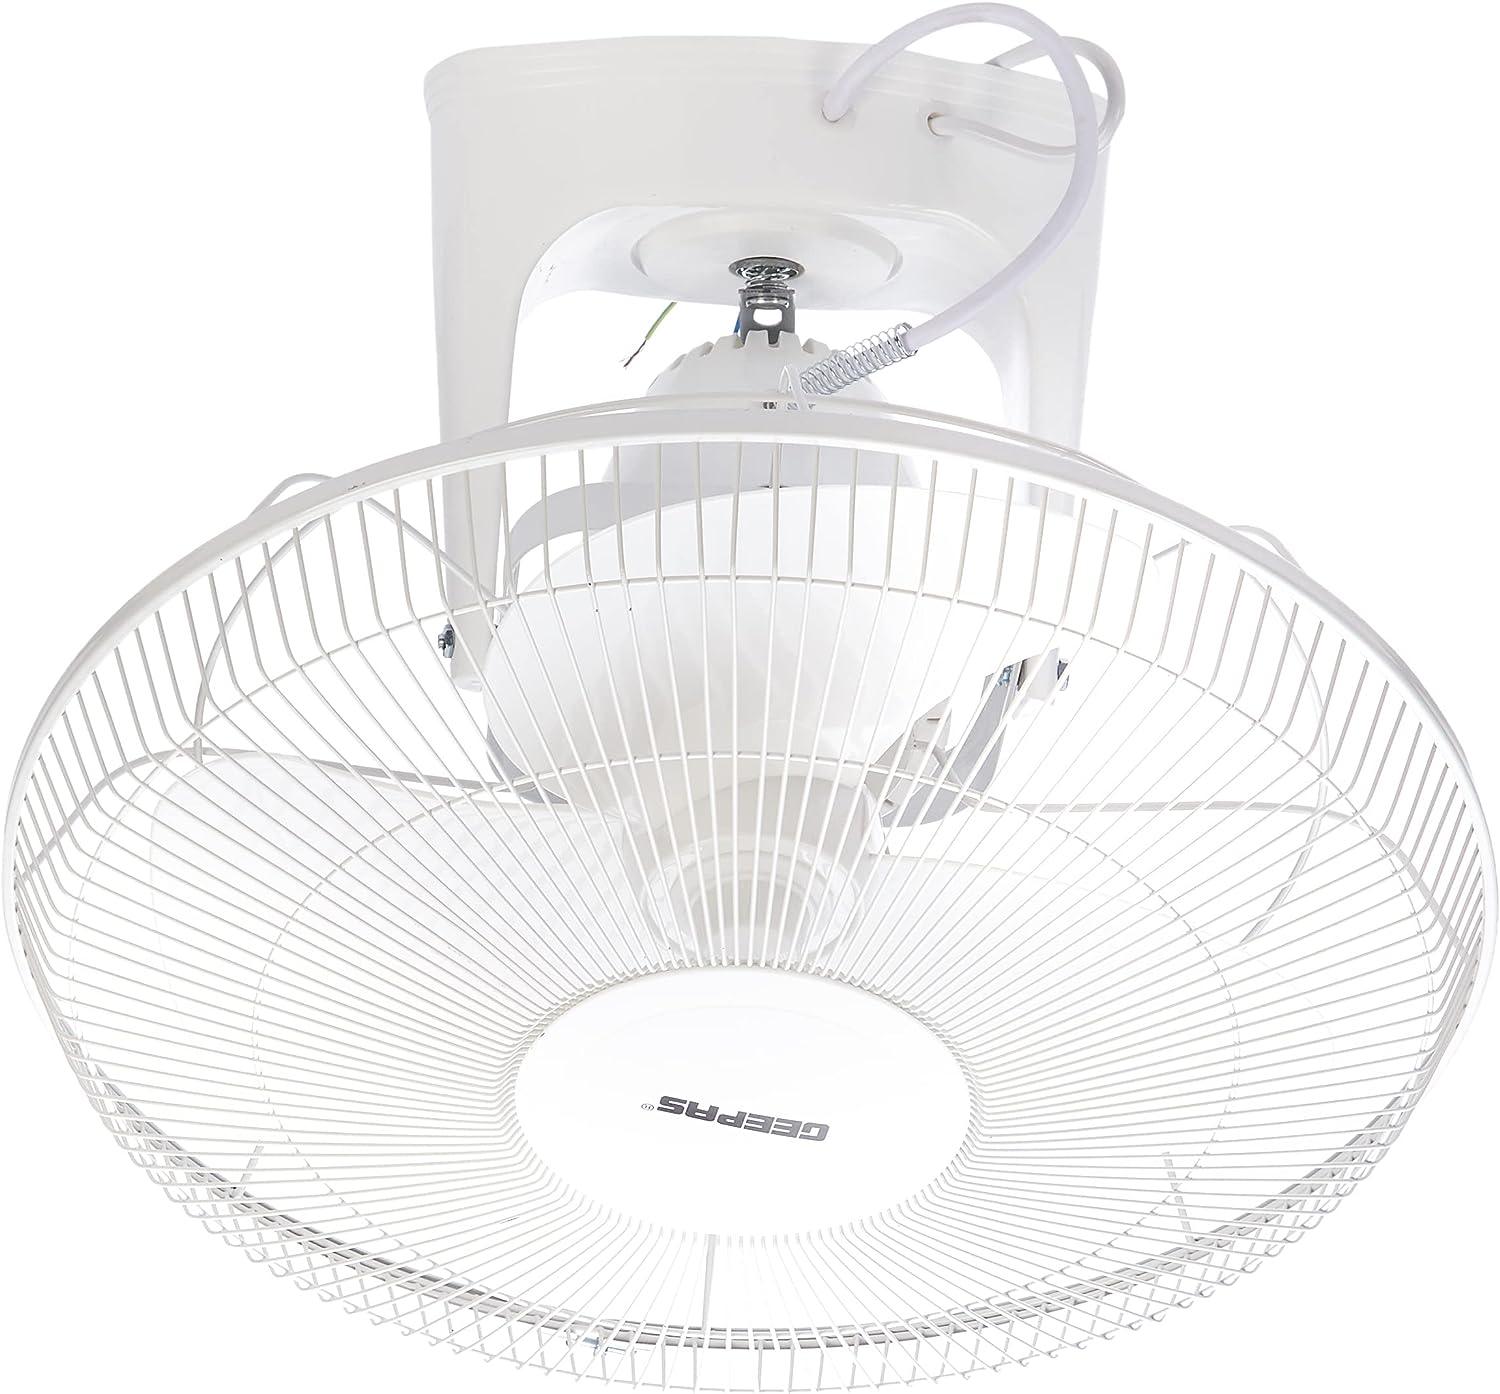 Ceiling fan by Geepas, white color 16"- model GF9607